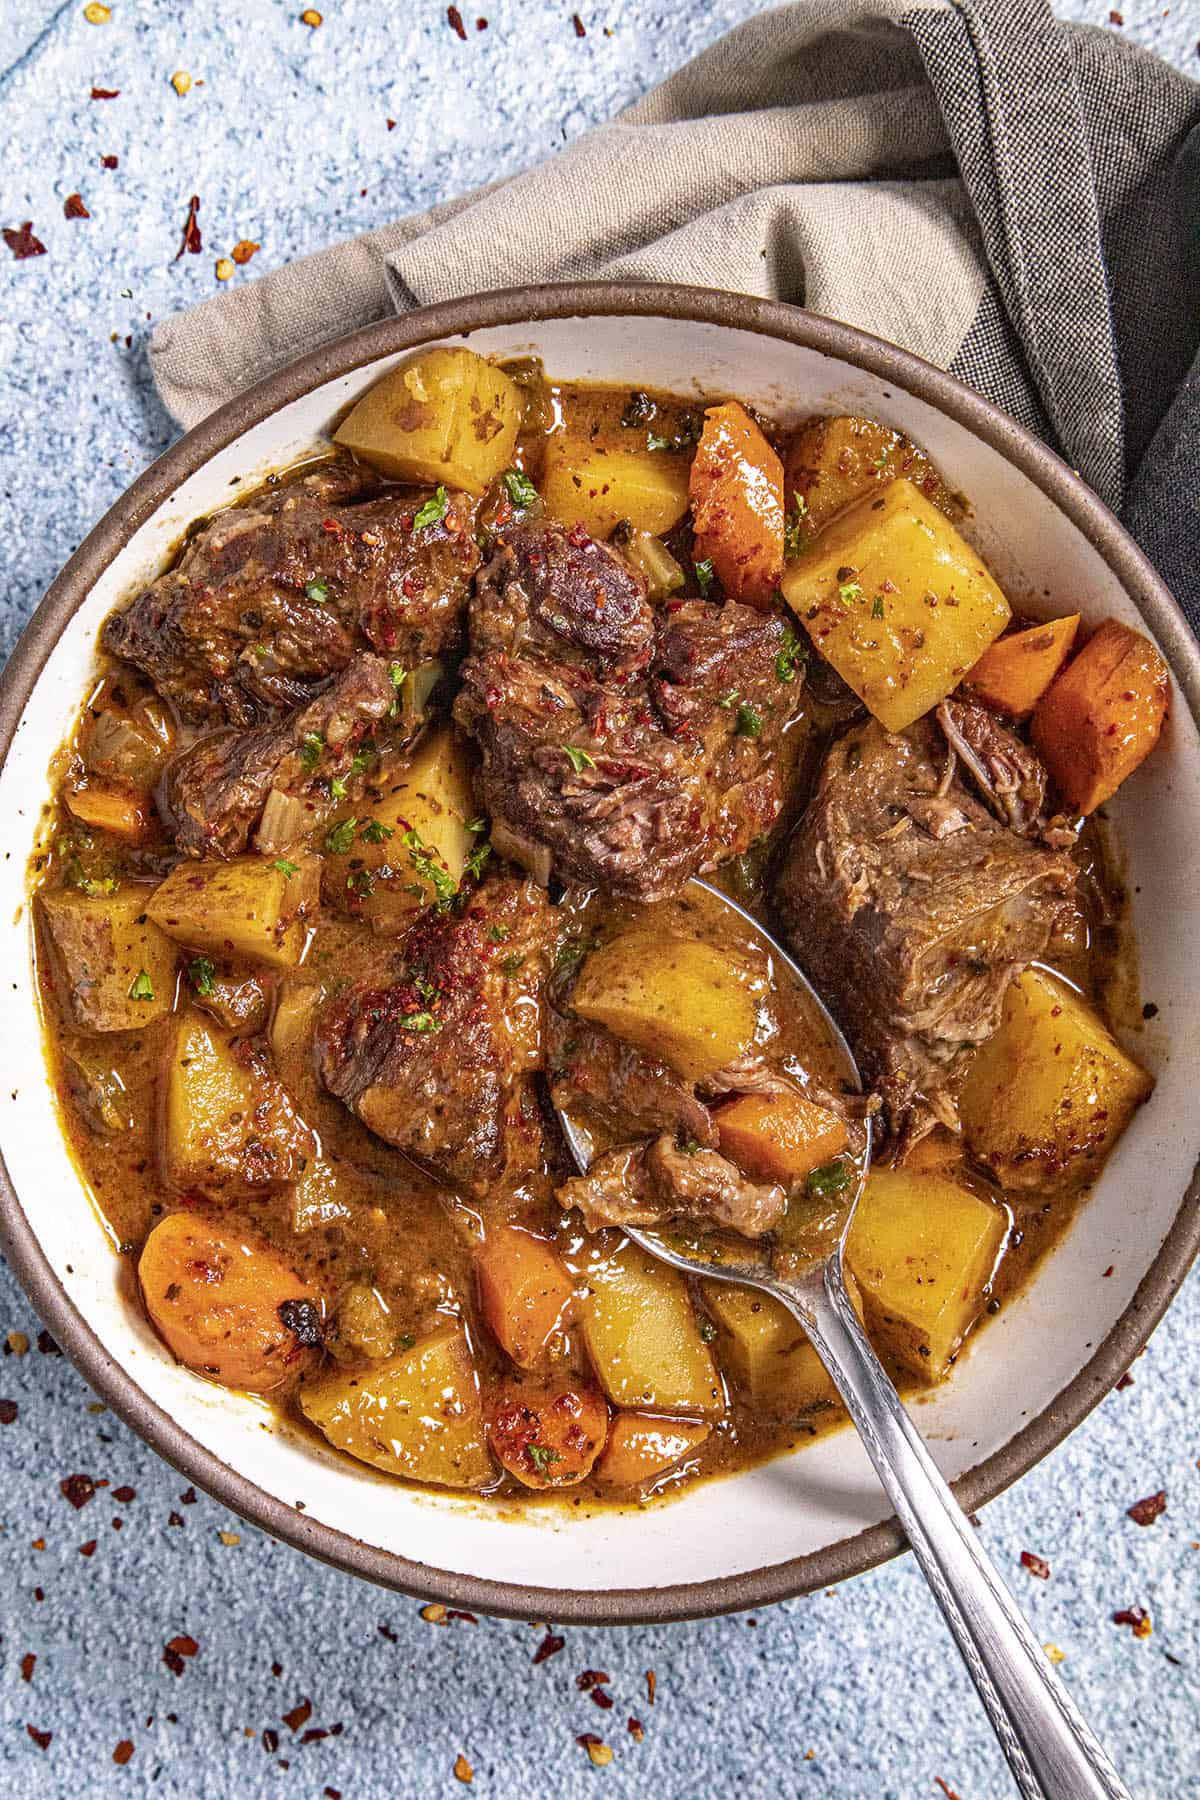 Beef stew in a bowl, ready to serve